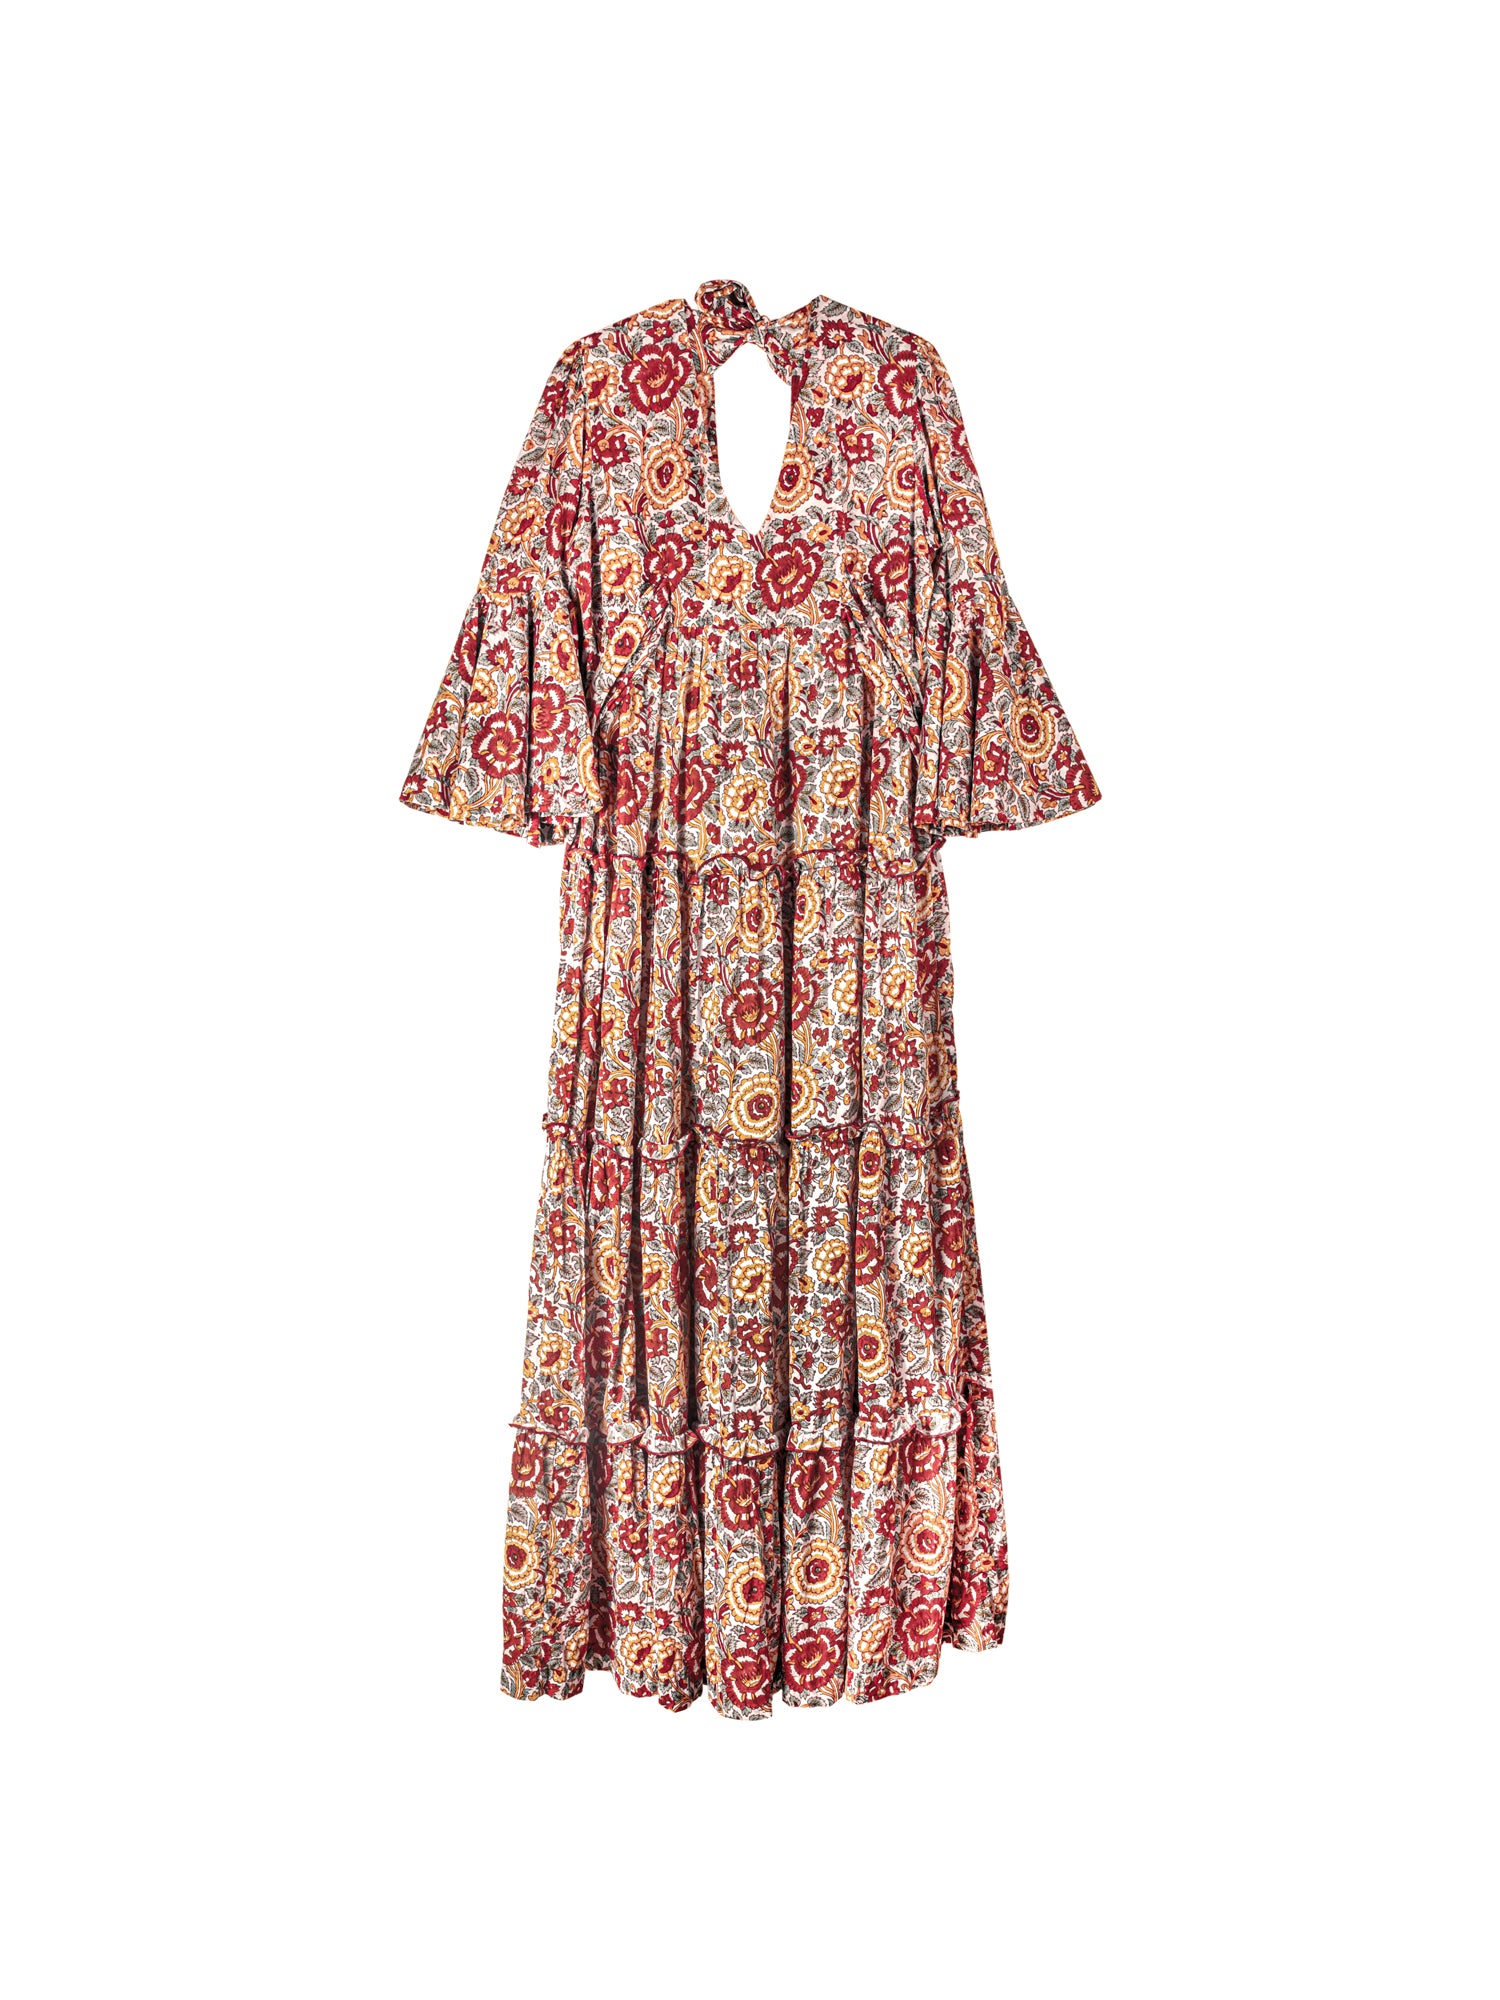 Block Printed Women's Dress - Lucky Red Floral